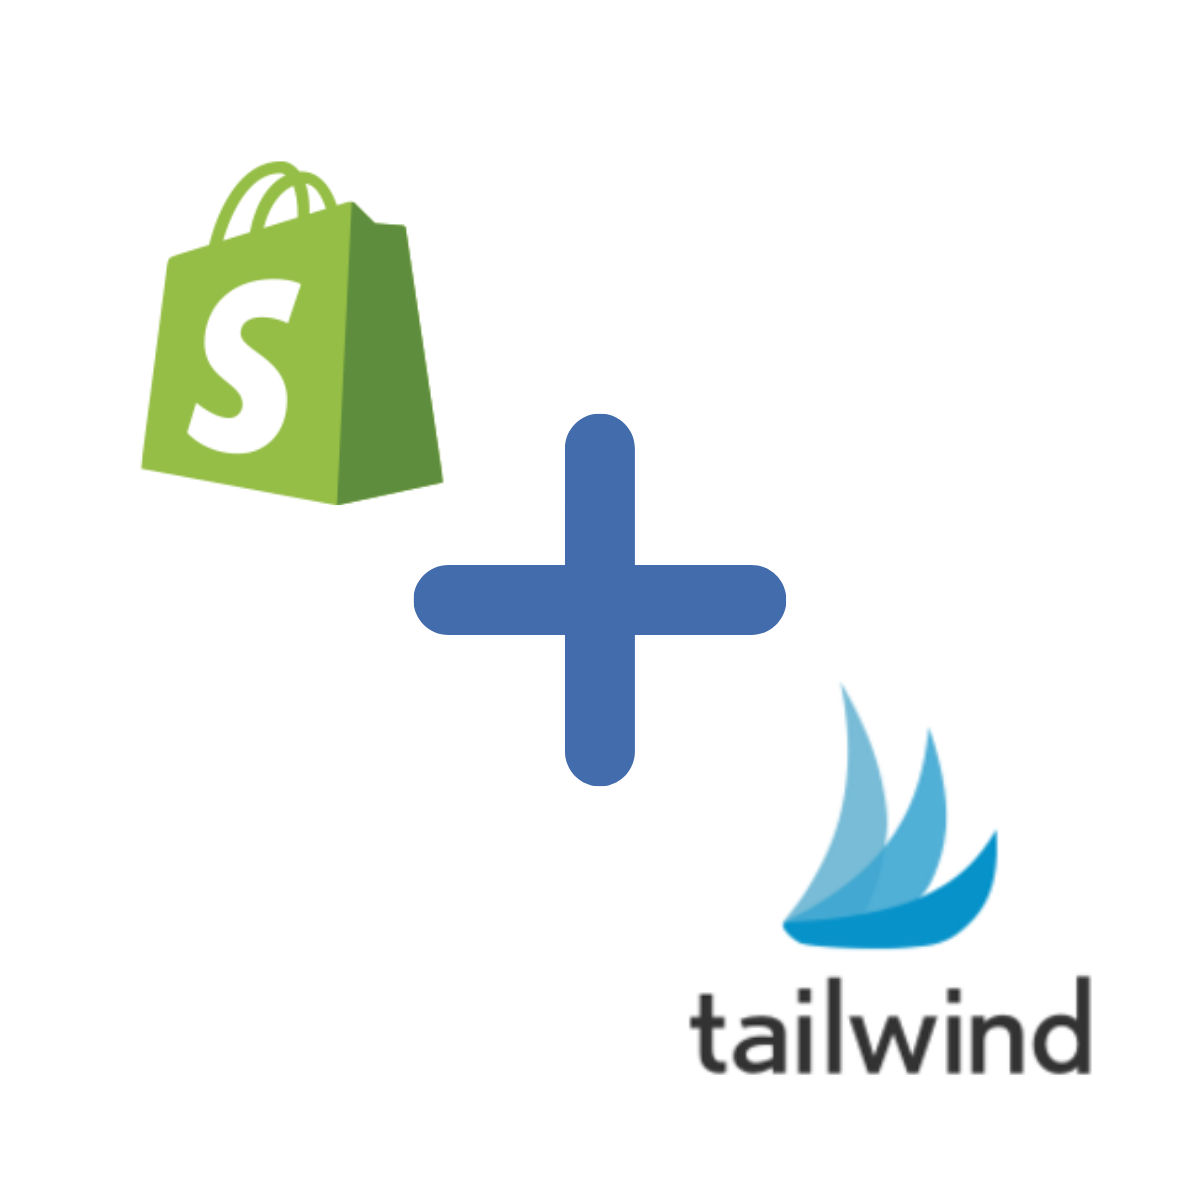 Cut Out the Inconsistency in Your Business, Makers-- It’s Time to Check Out Tailwind!